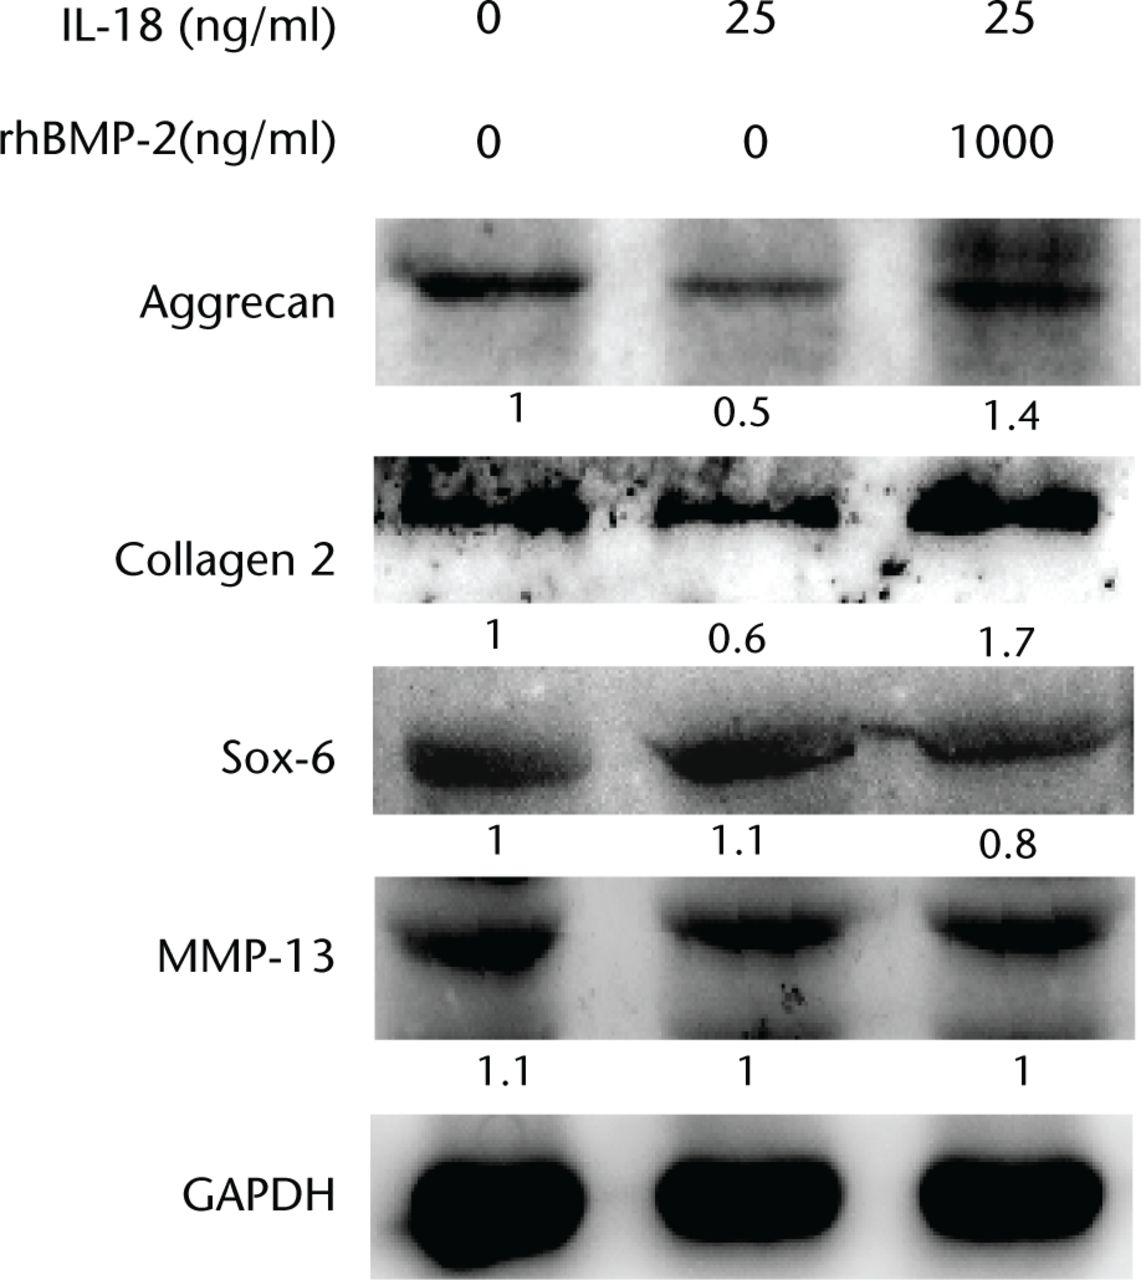 Fig. 4 
            Western blot analysis of protein expression of aggrecan, type II collagen, MMP13, and SOX6 in response to combined treatment with interleukin (IL)-18 and recombinant human (rh)BMP-2. Cells were harvested at 24 hours and immunoblotted with specific antibodies. The relative densities (RD) of proteins were quantified and plotted against the signal obtained from the control after normalisation to Glyceraldehyde 3-phosphate dehydrogenase (GAPDH).
          